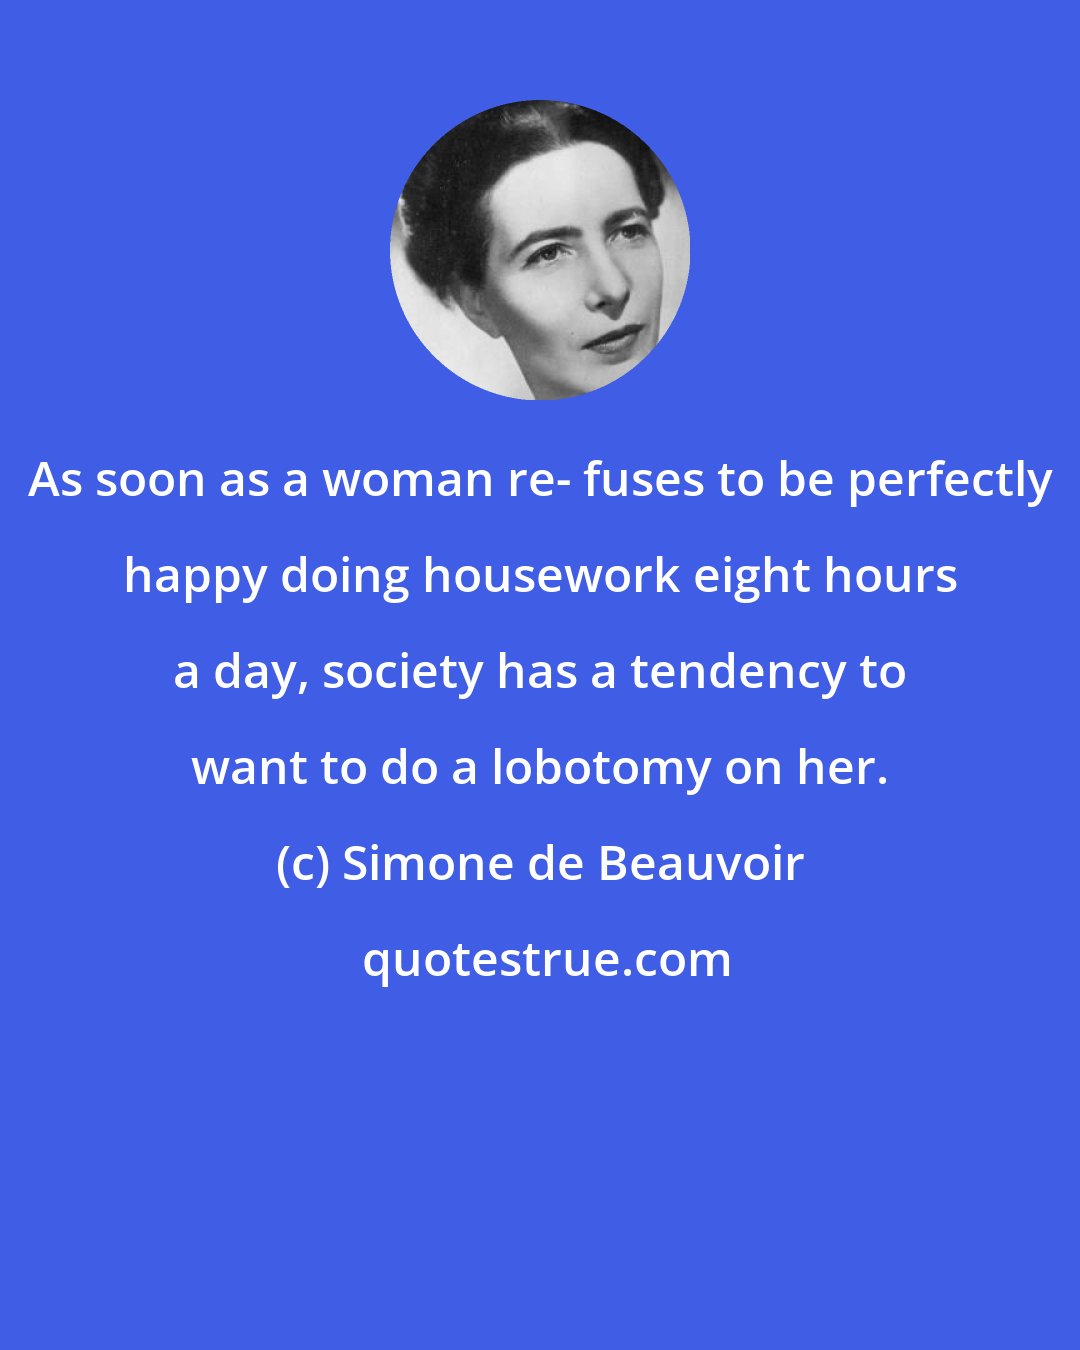 Simone de Beauvoir: As soon as a woman re- fuses to be perfectly happy doing housework eight hours a day, society has a tendency to want to do a lobotomy on her.